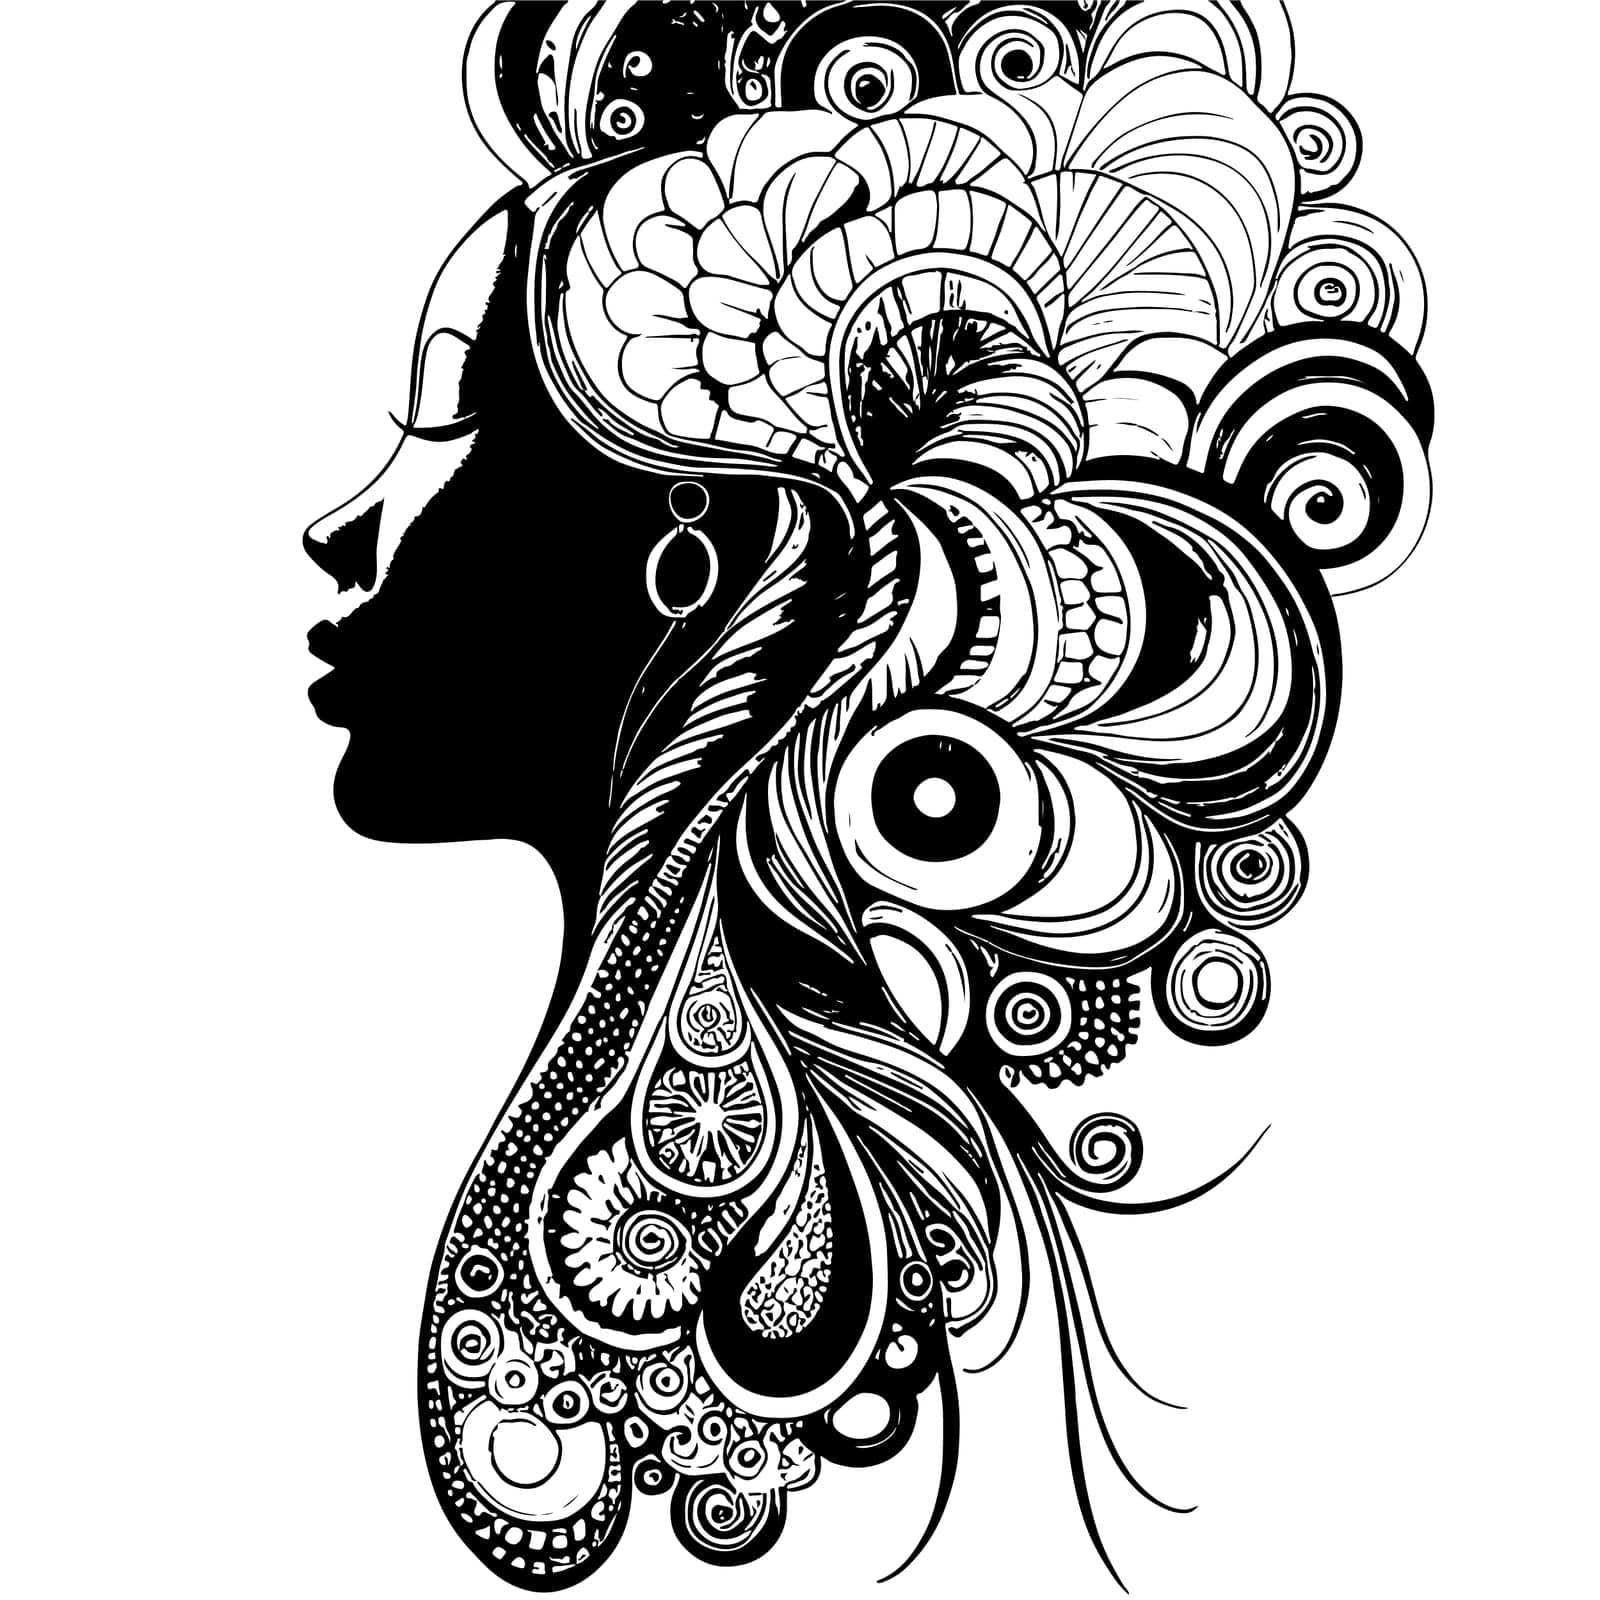 Sketch of beautiful woman silhouette with art hairstyle black and white design. by EkaterinaPereslavtseva